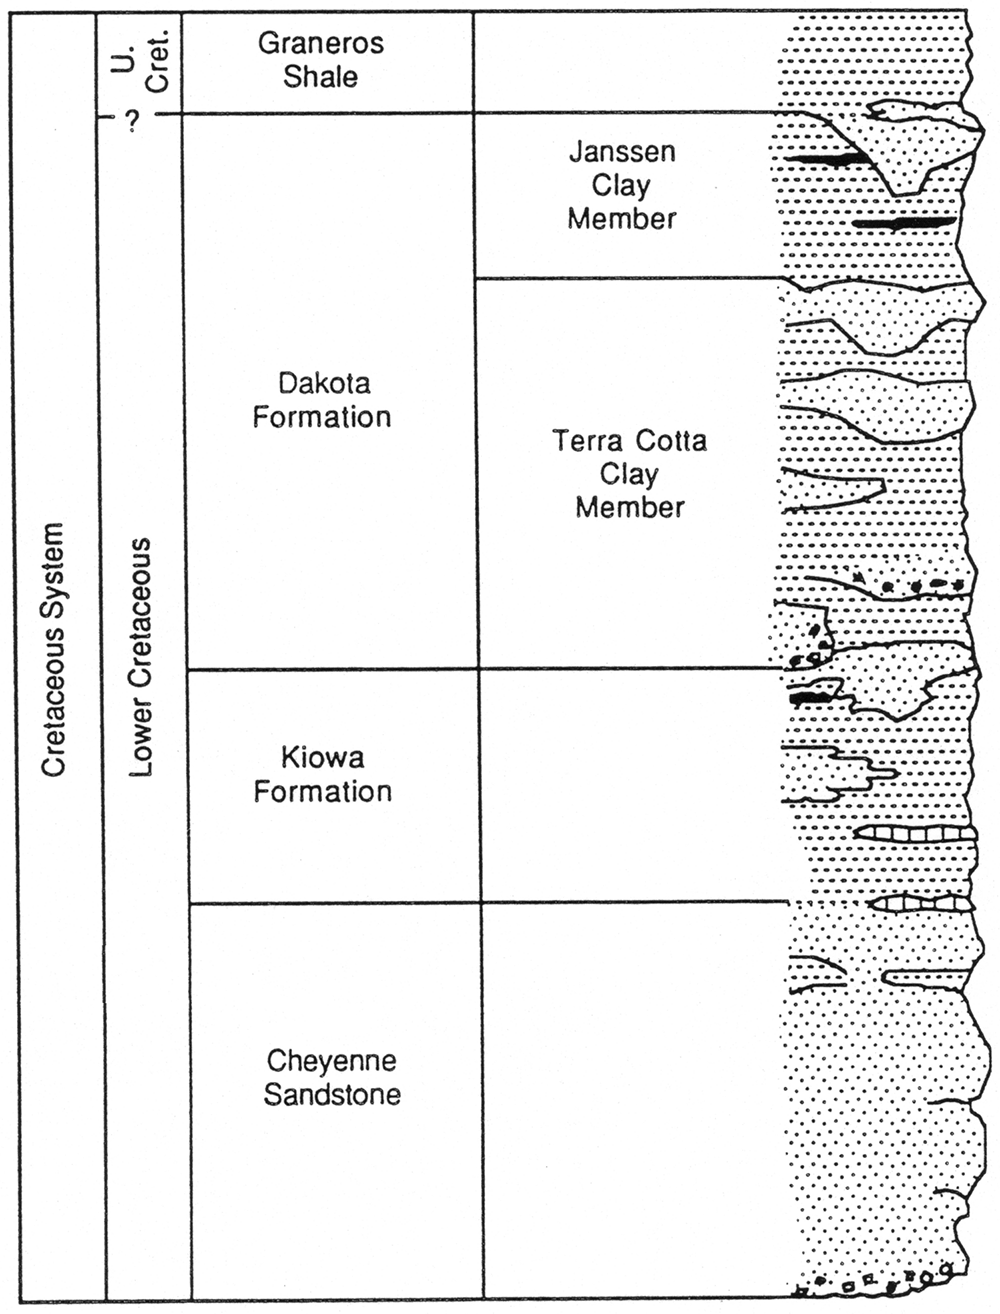 Schematic stratigraphic column showing the distribution of rock types and sandstone aquifers in the Lower Cretaceous rocks.